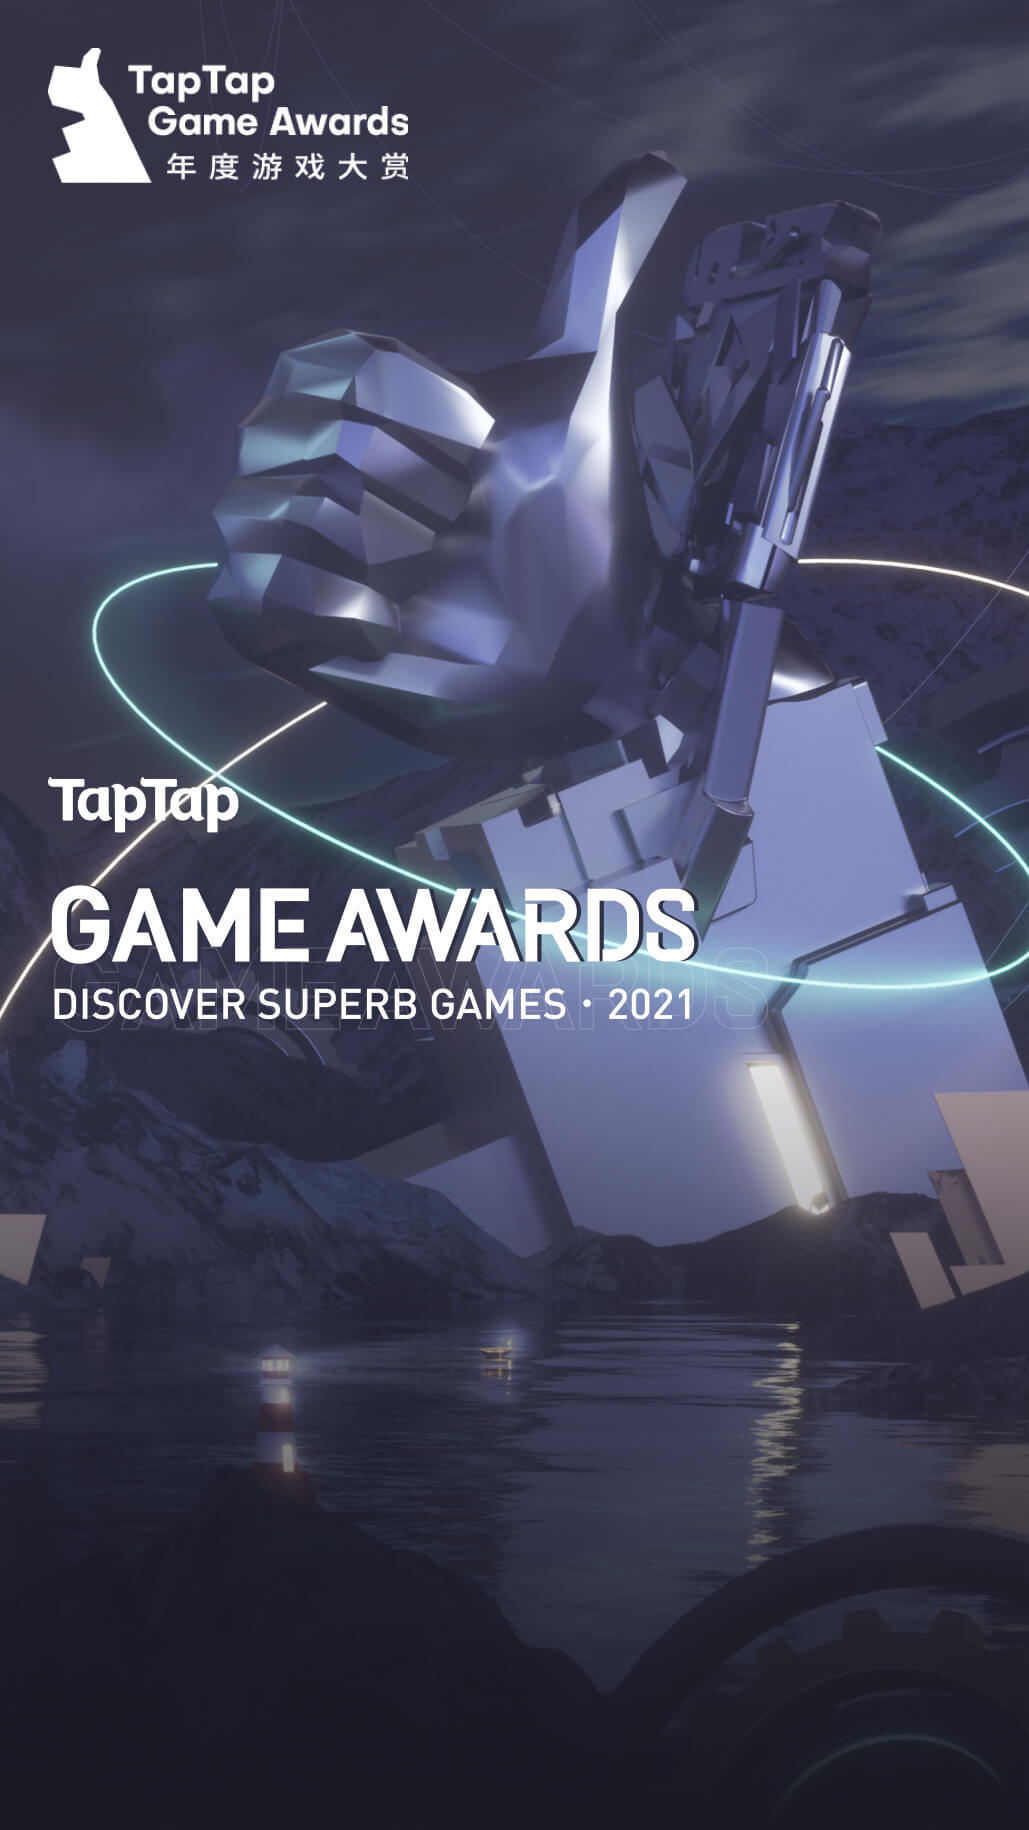 The Game Awards 2020 Winners List Released